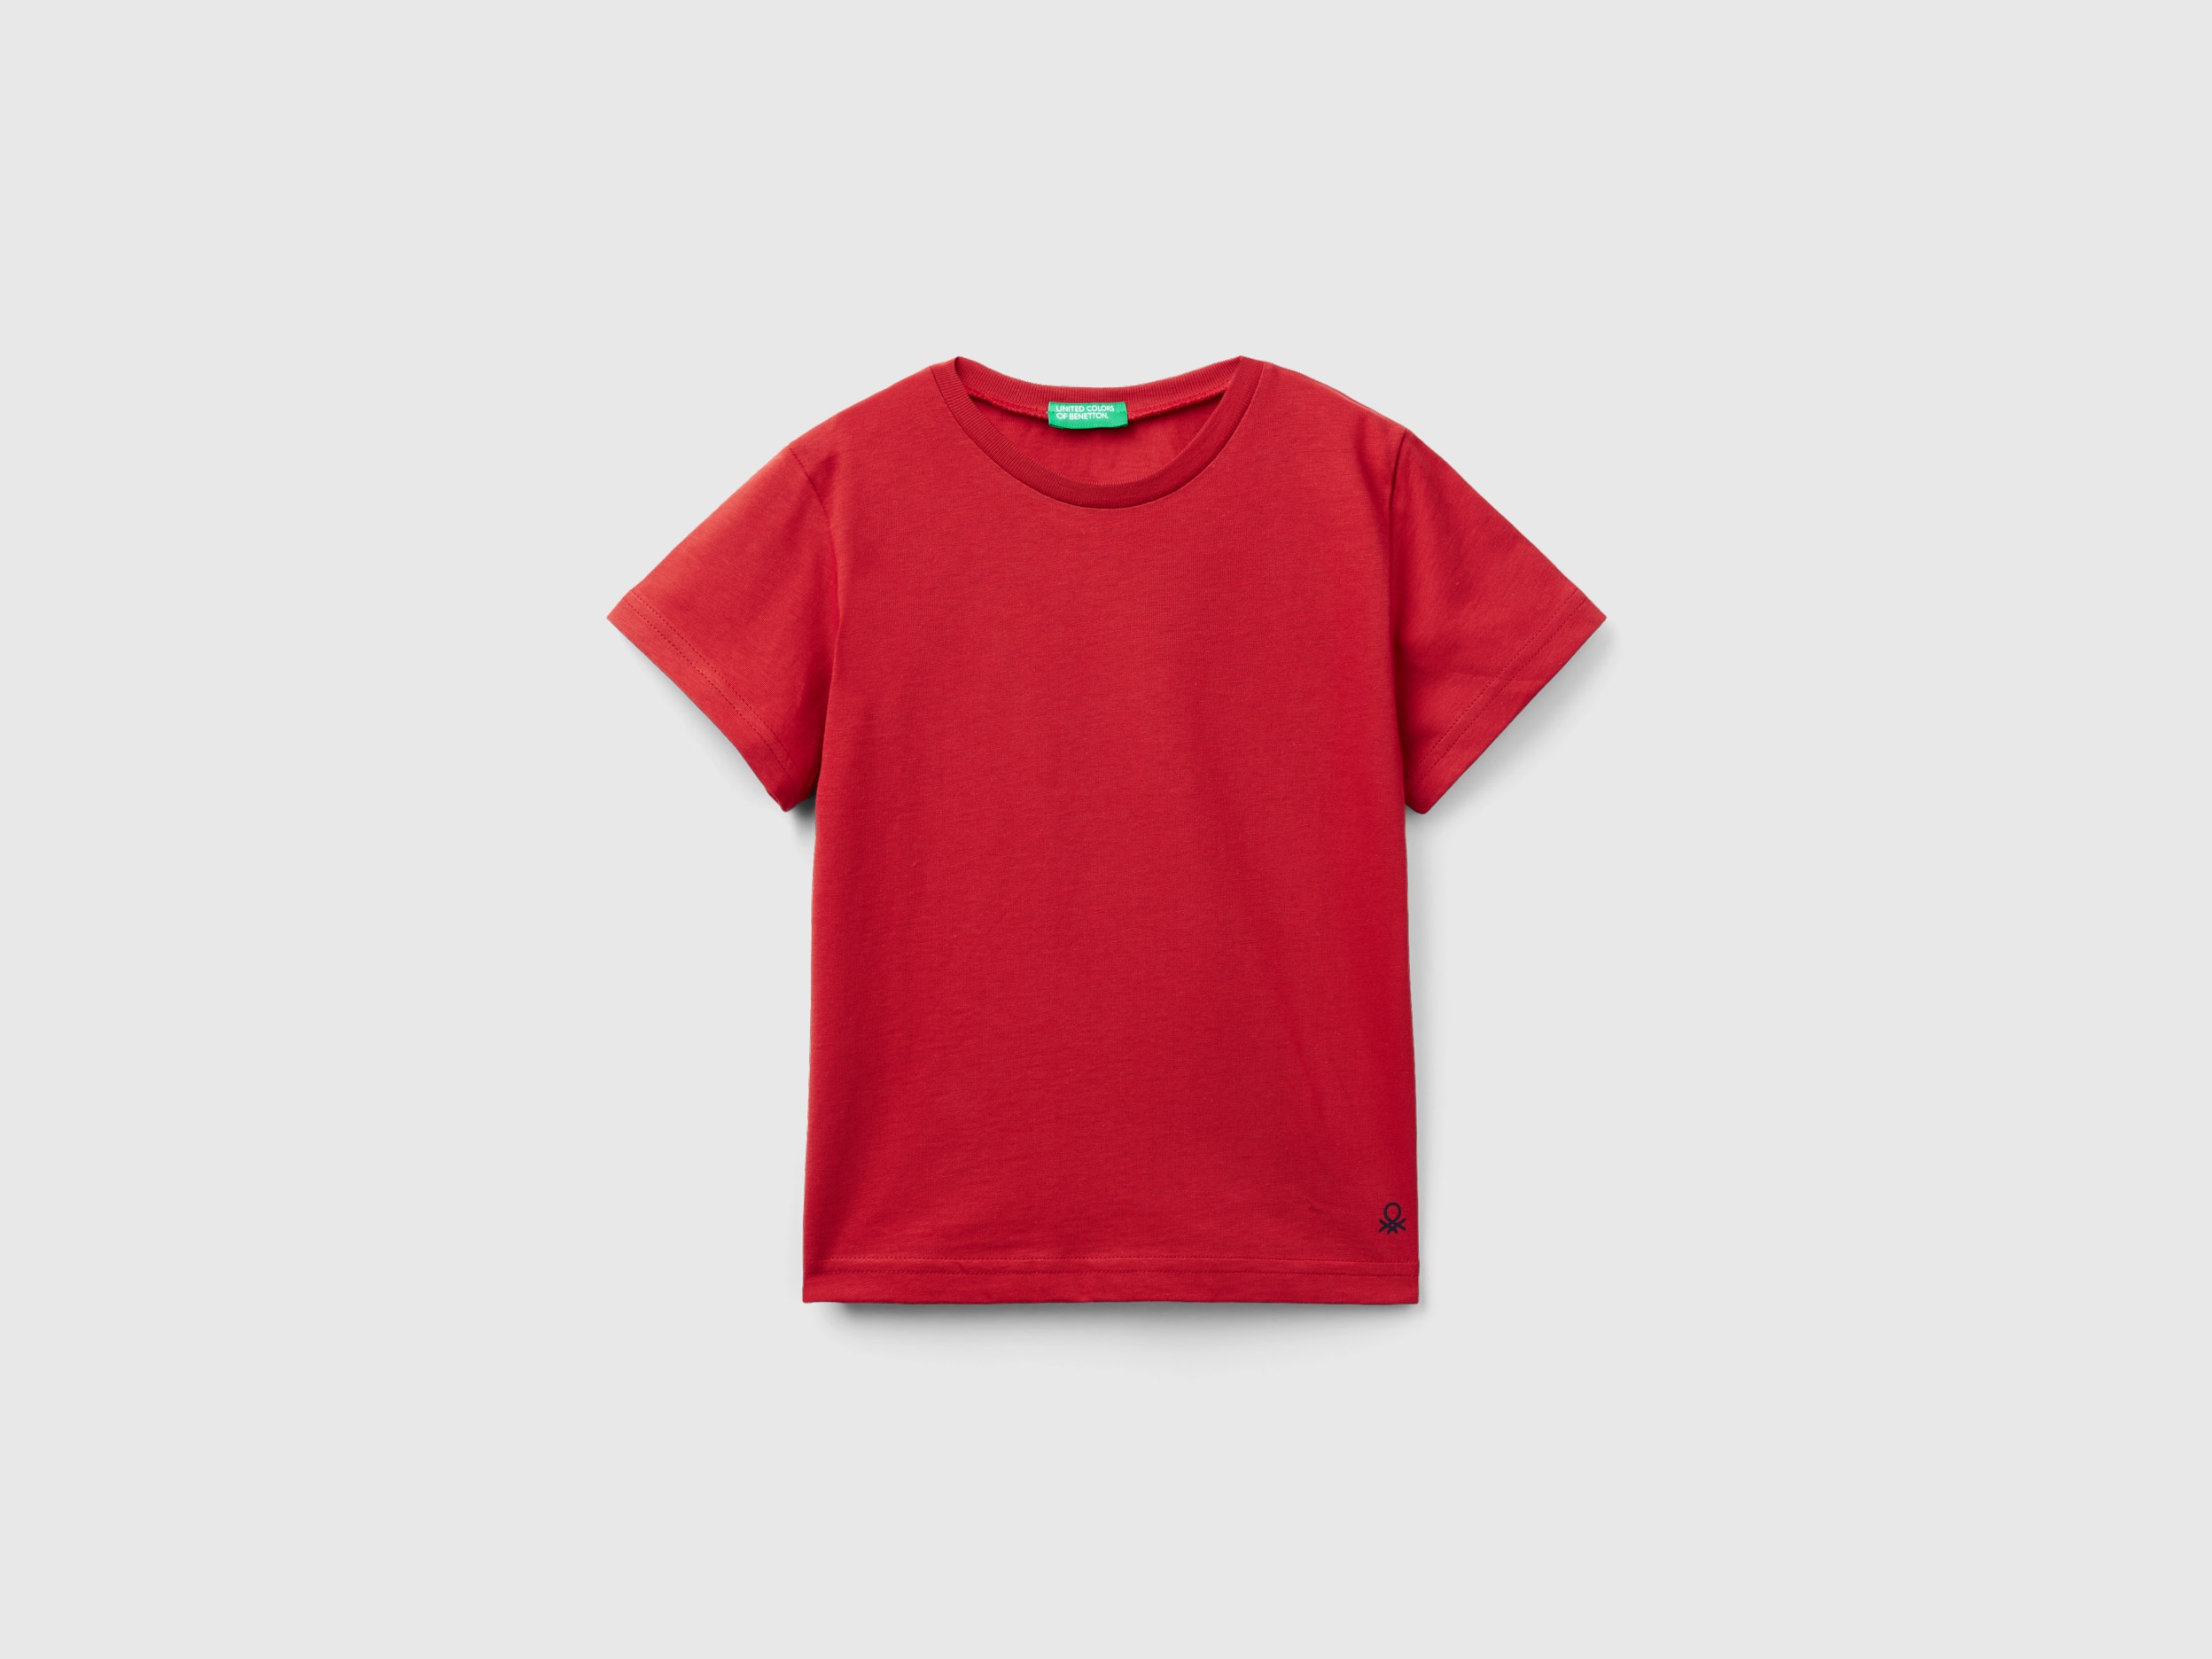 Image of Benetton, T-shirt In Organic Cotton, size 104, Brick Red, Kids